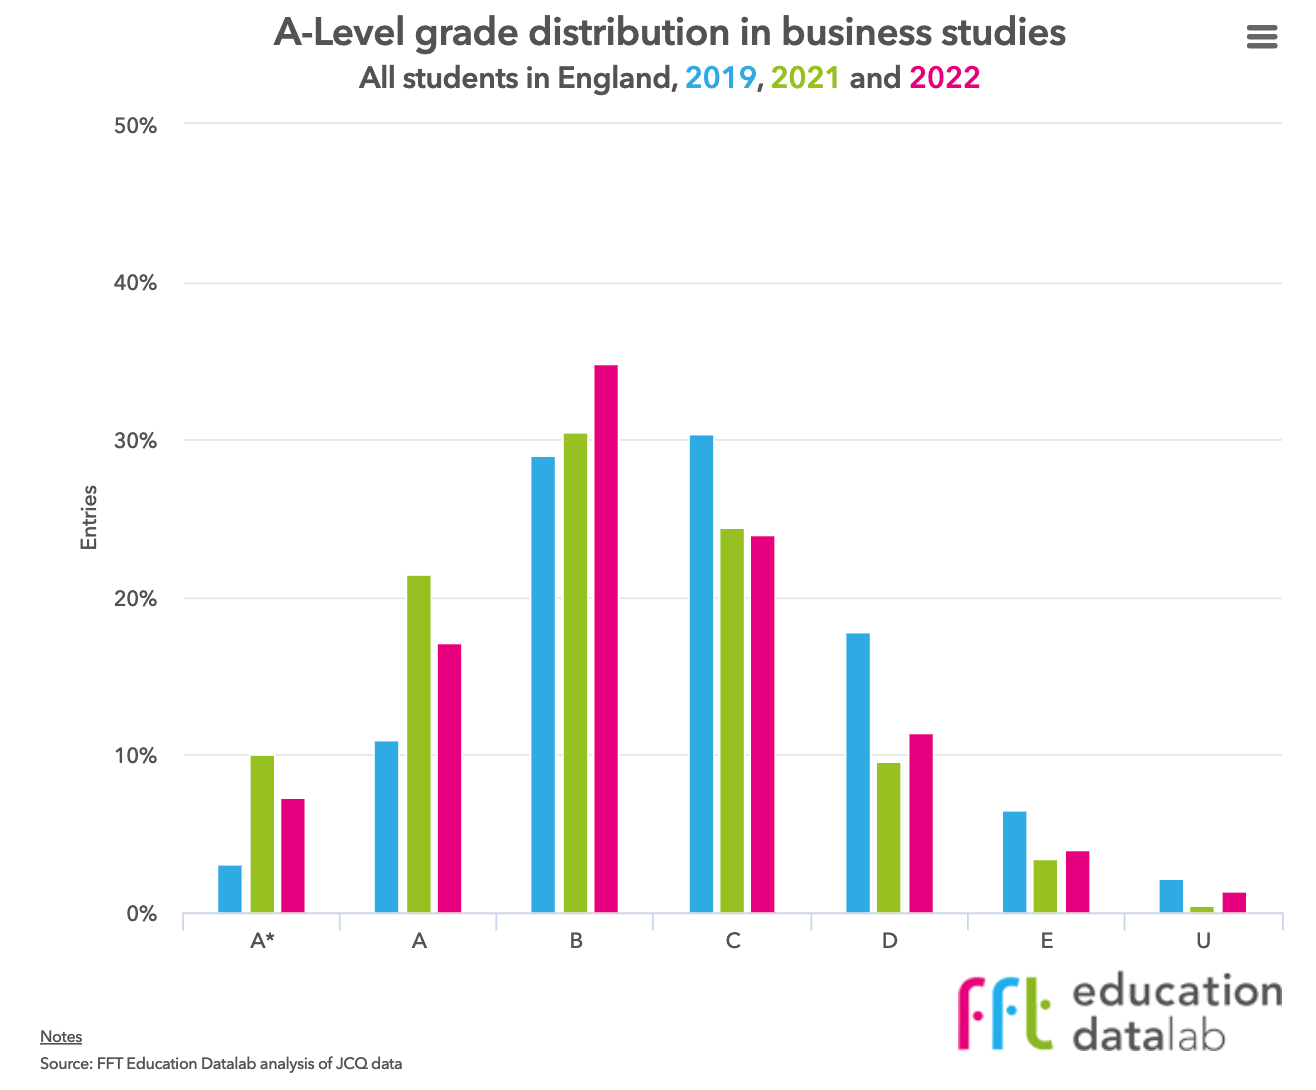 A-Level grade distribution in business studies